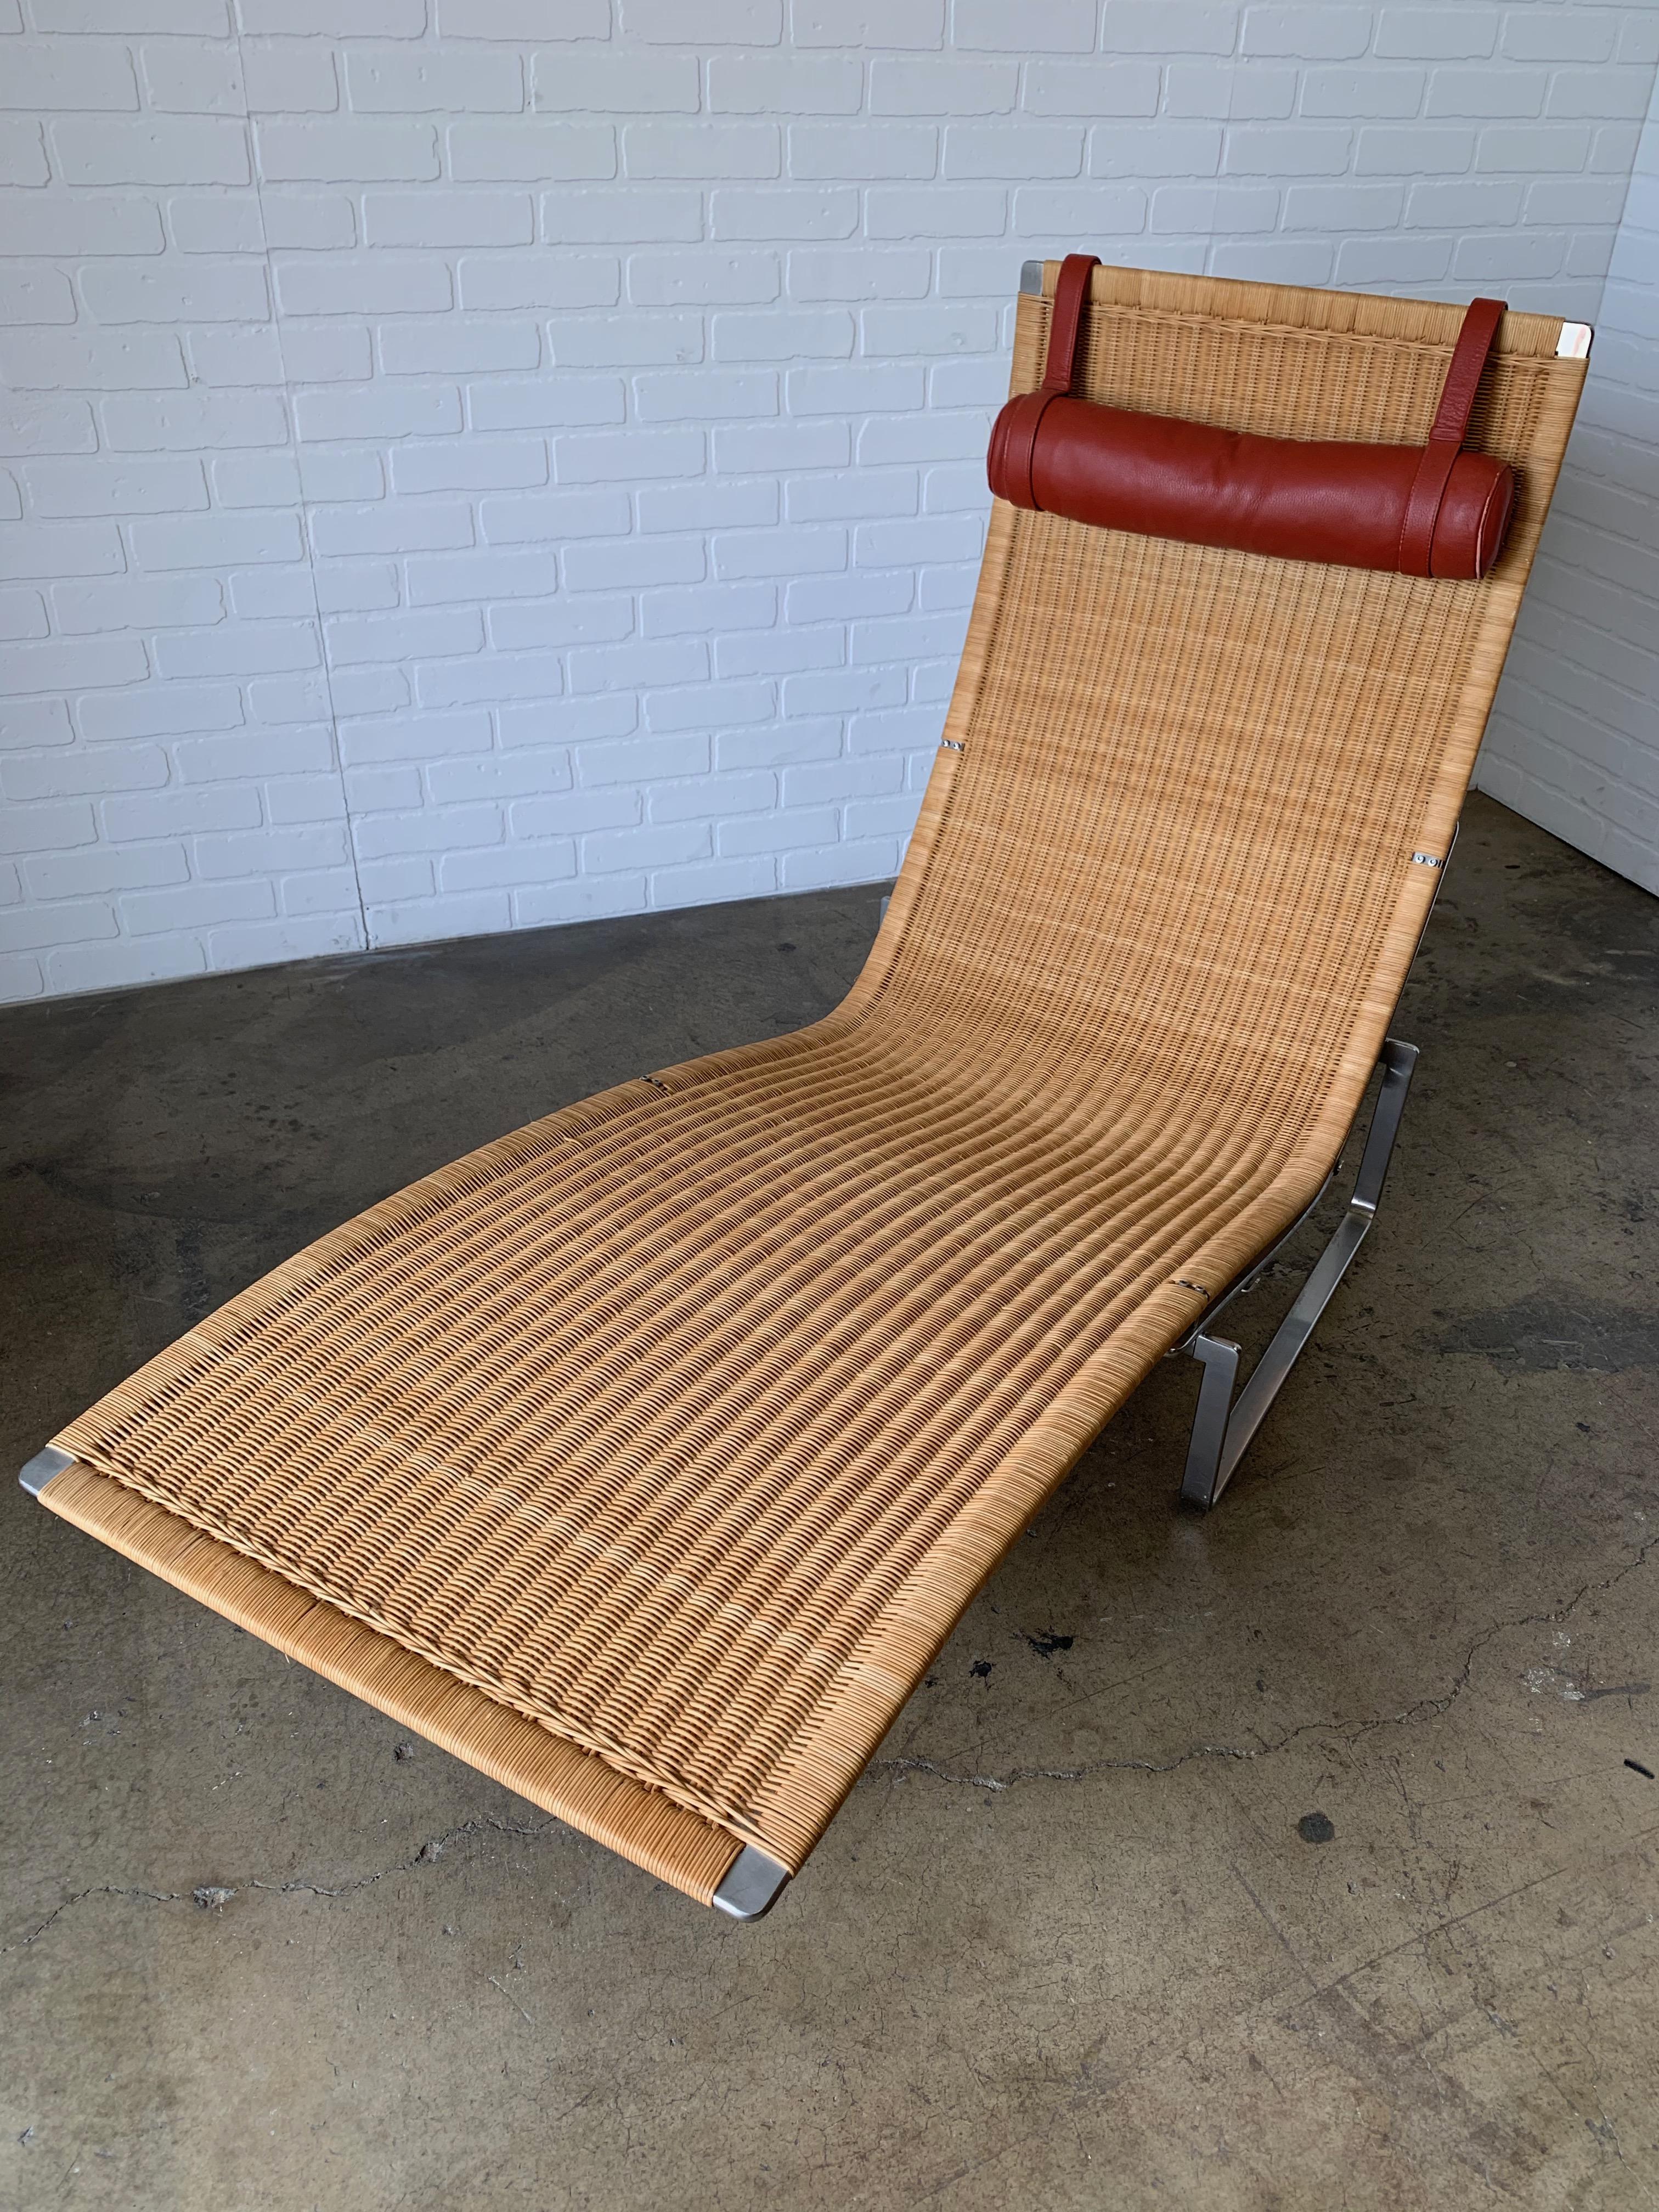 Poul Kjærholm PK 24 Chaise Lounge with Wicker Seat for Fritz Hansen 5